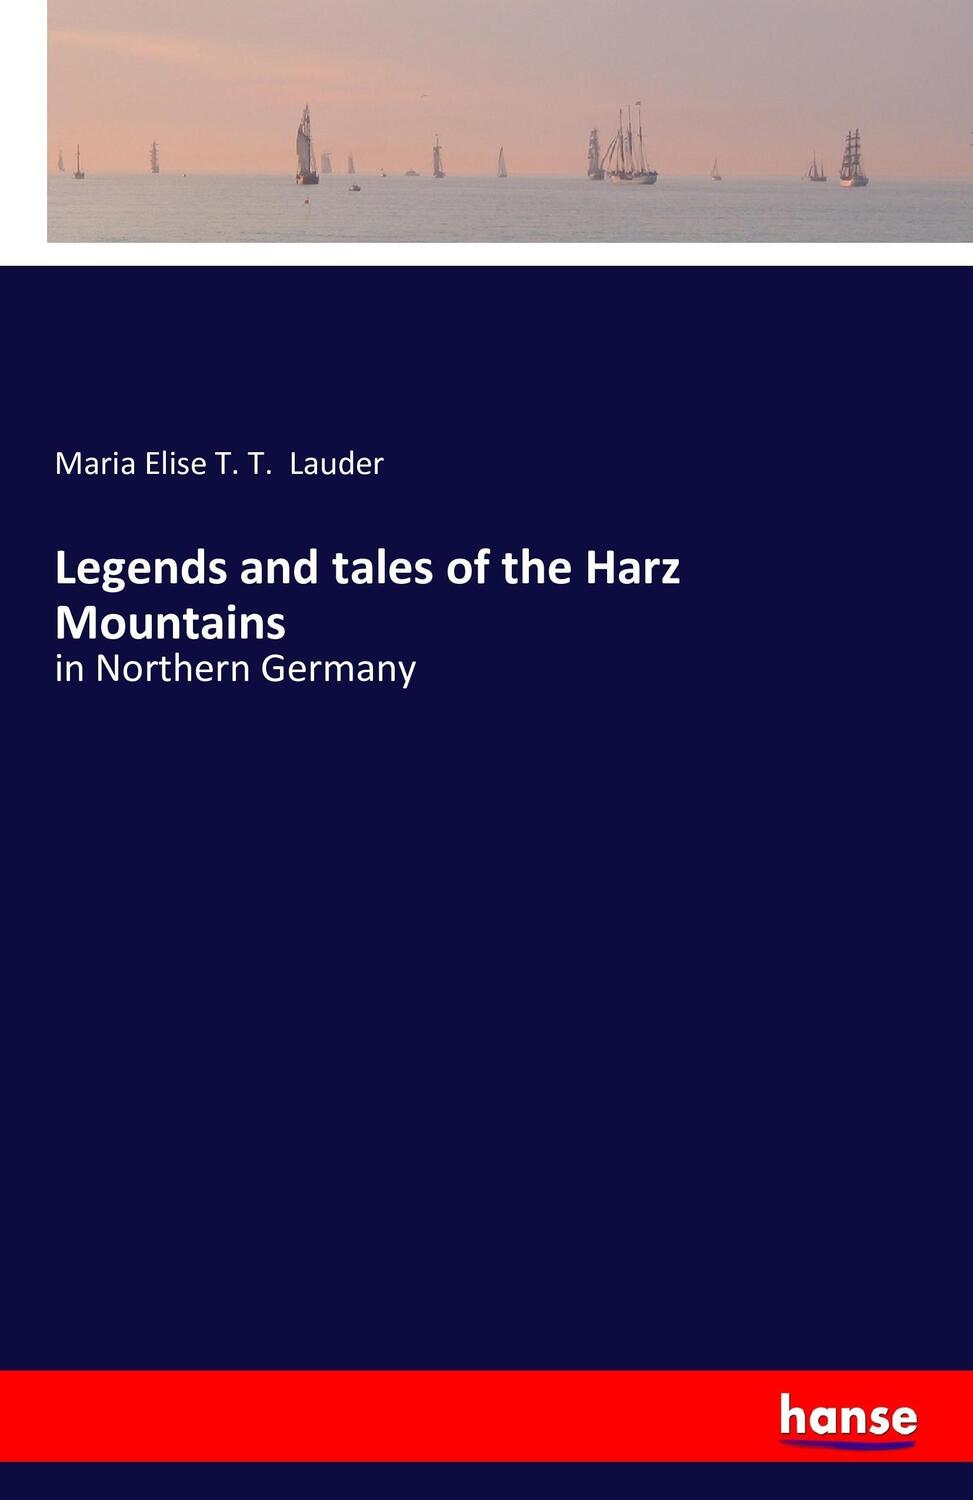 Cover: 9783742899682 | Legends and tales of the Harz Mountains | in Northern Germany | Lauder